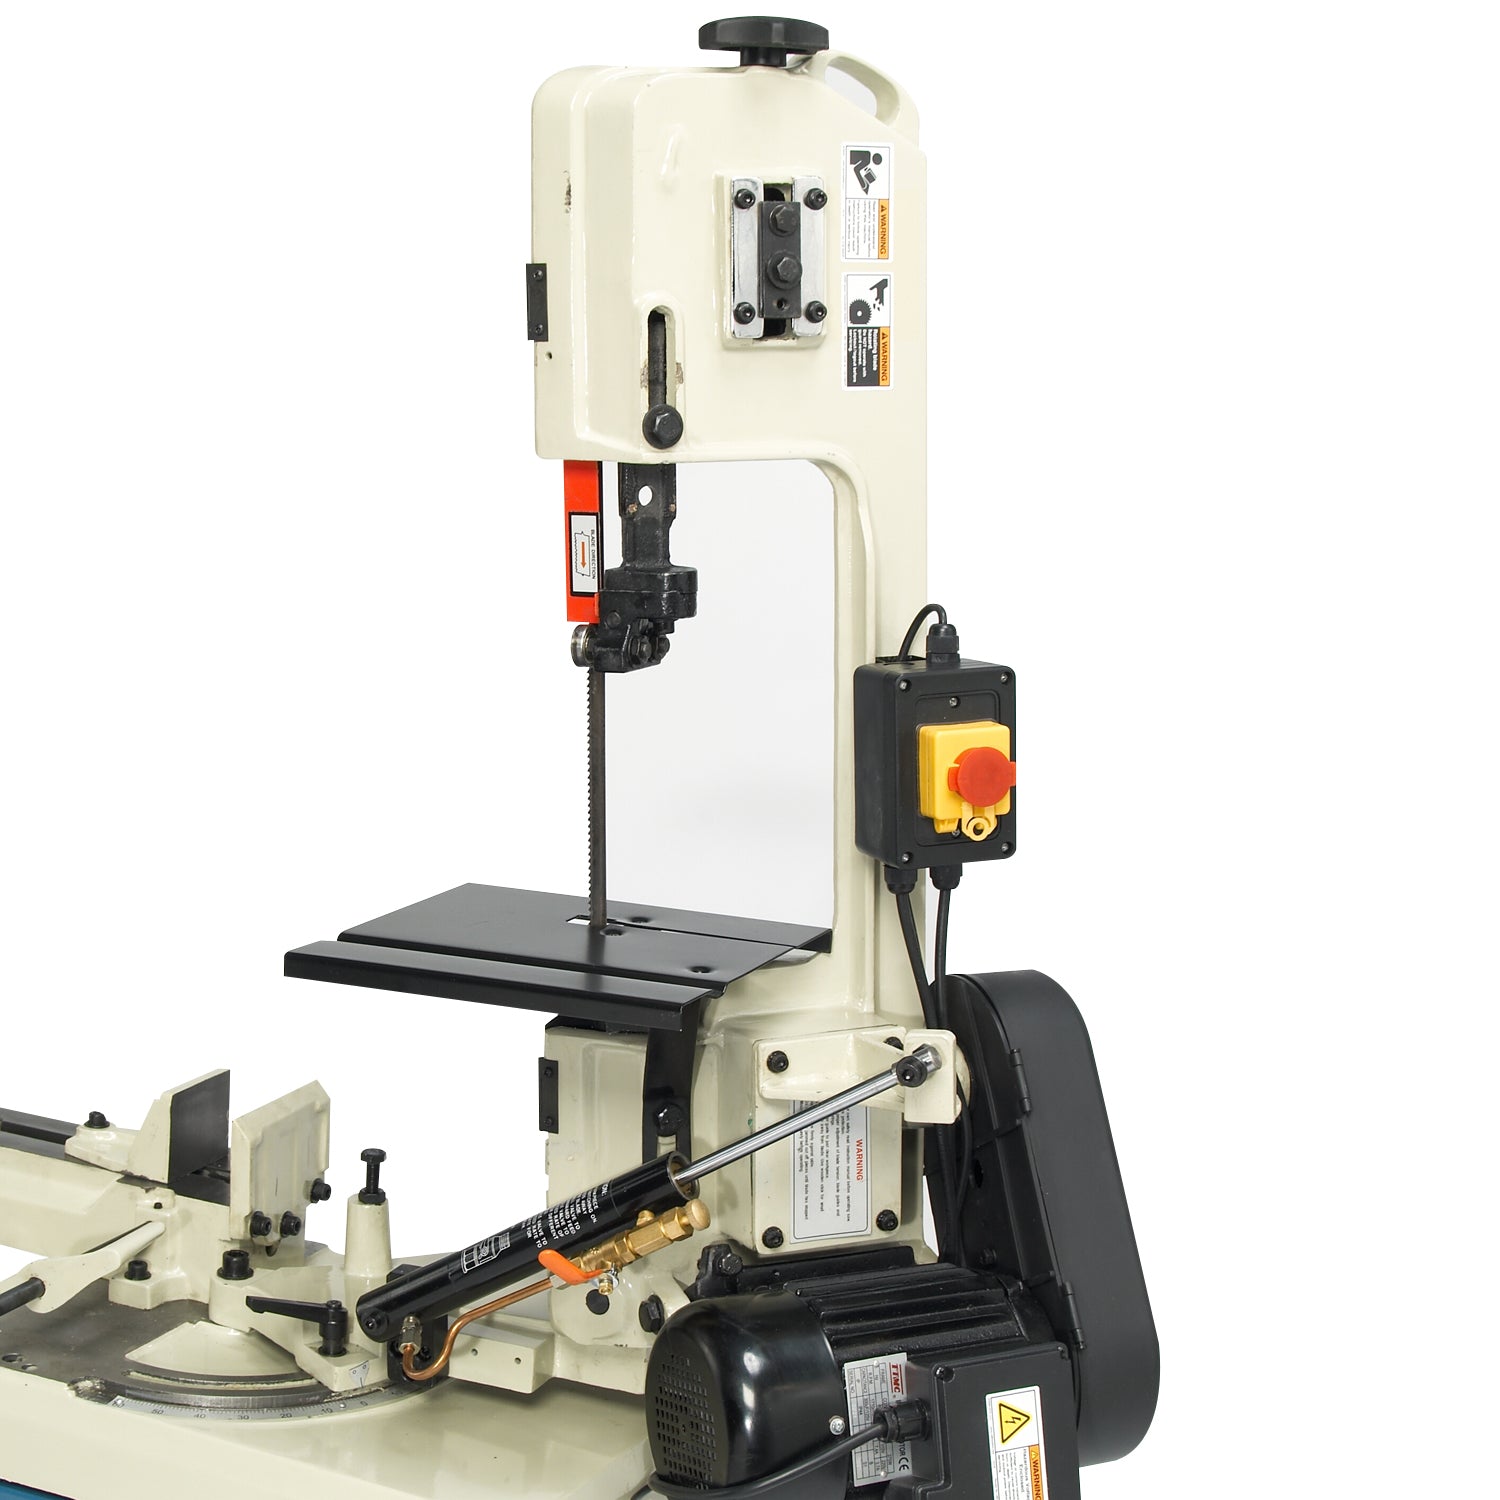 Baileigh BS-128M 110V Metal Cutting Band Saw with Vertical Cutting Option 5" Round Capacity at 90 Degrees